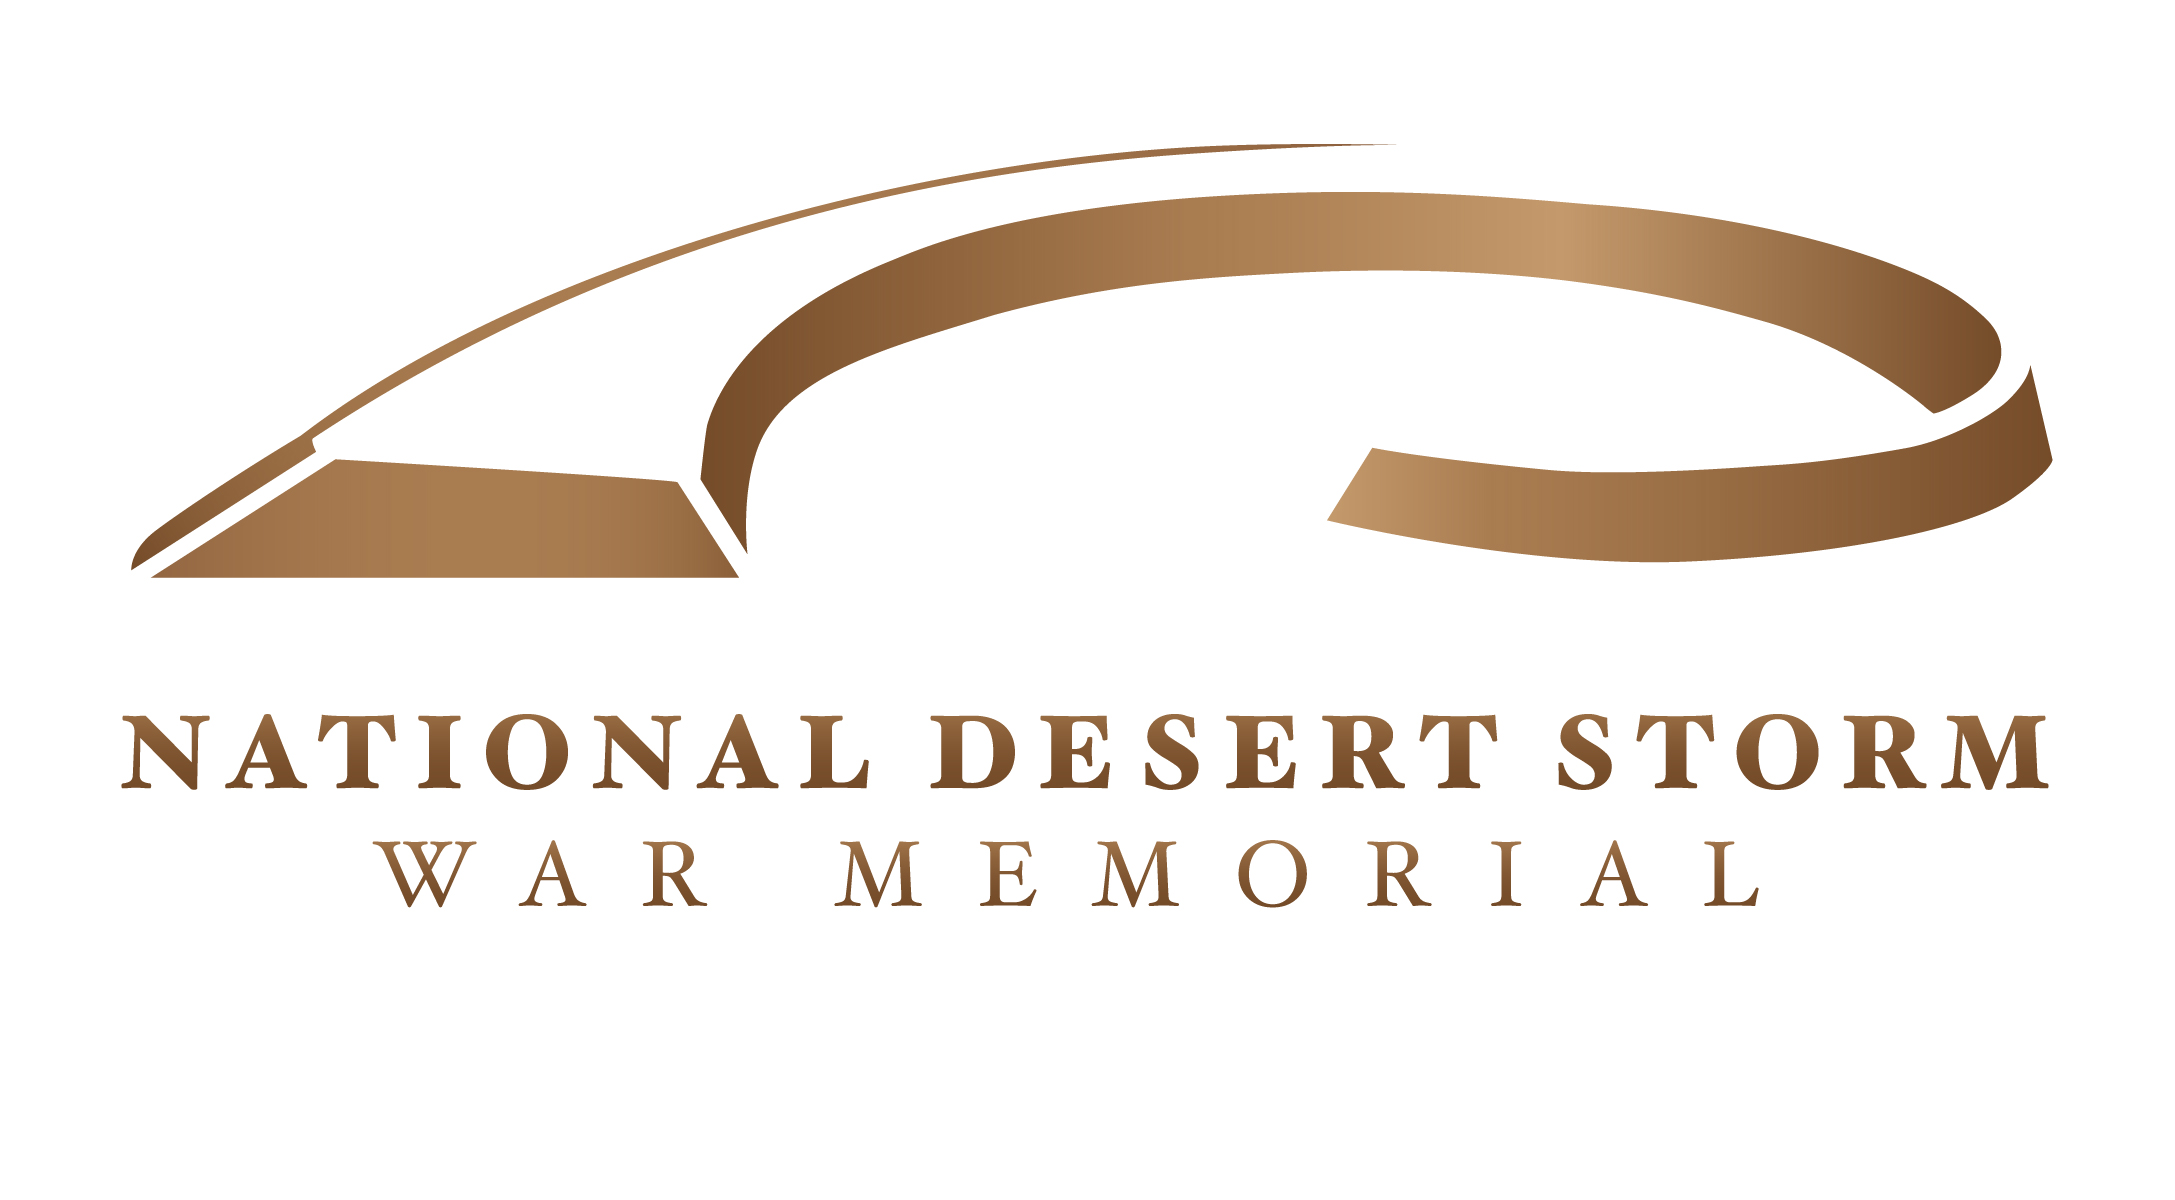 National Desert Storm War Memorial letter writing campaign VII Corps